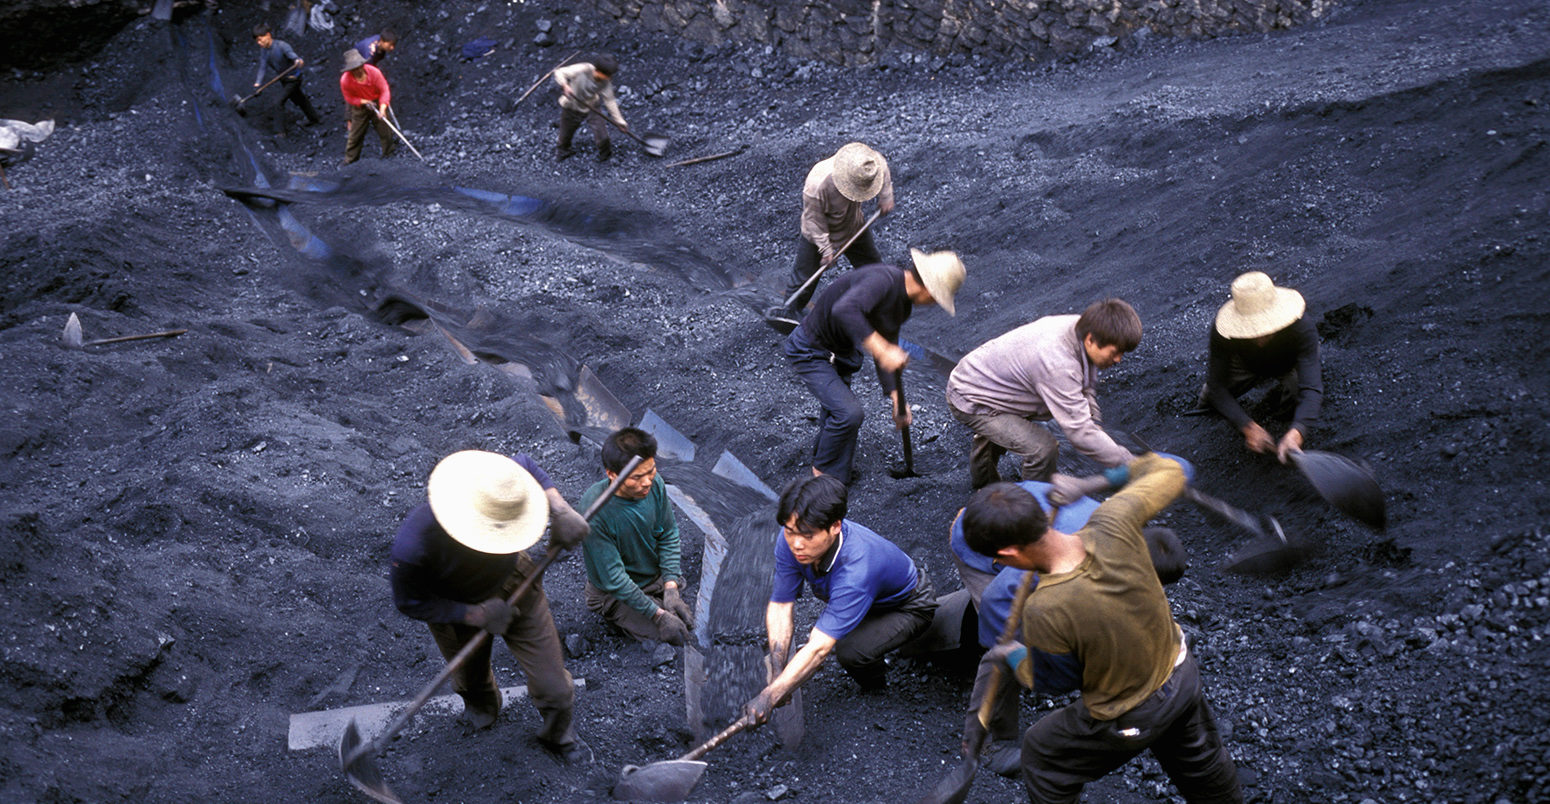 Coal workers in the village of Fengjie, working on the Three Gorges Dam project in Hubei province. Credit: FLUEELER URS / Alamy Stock Photo. GDWBB2